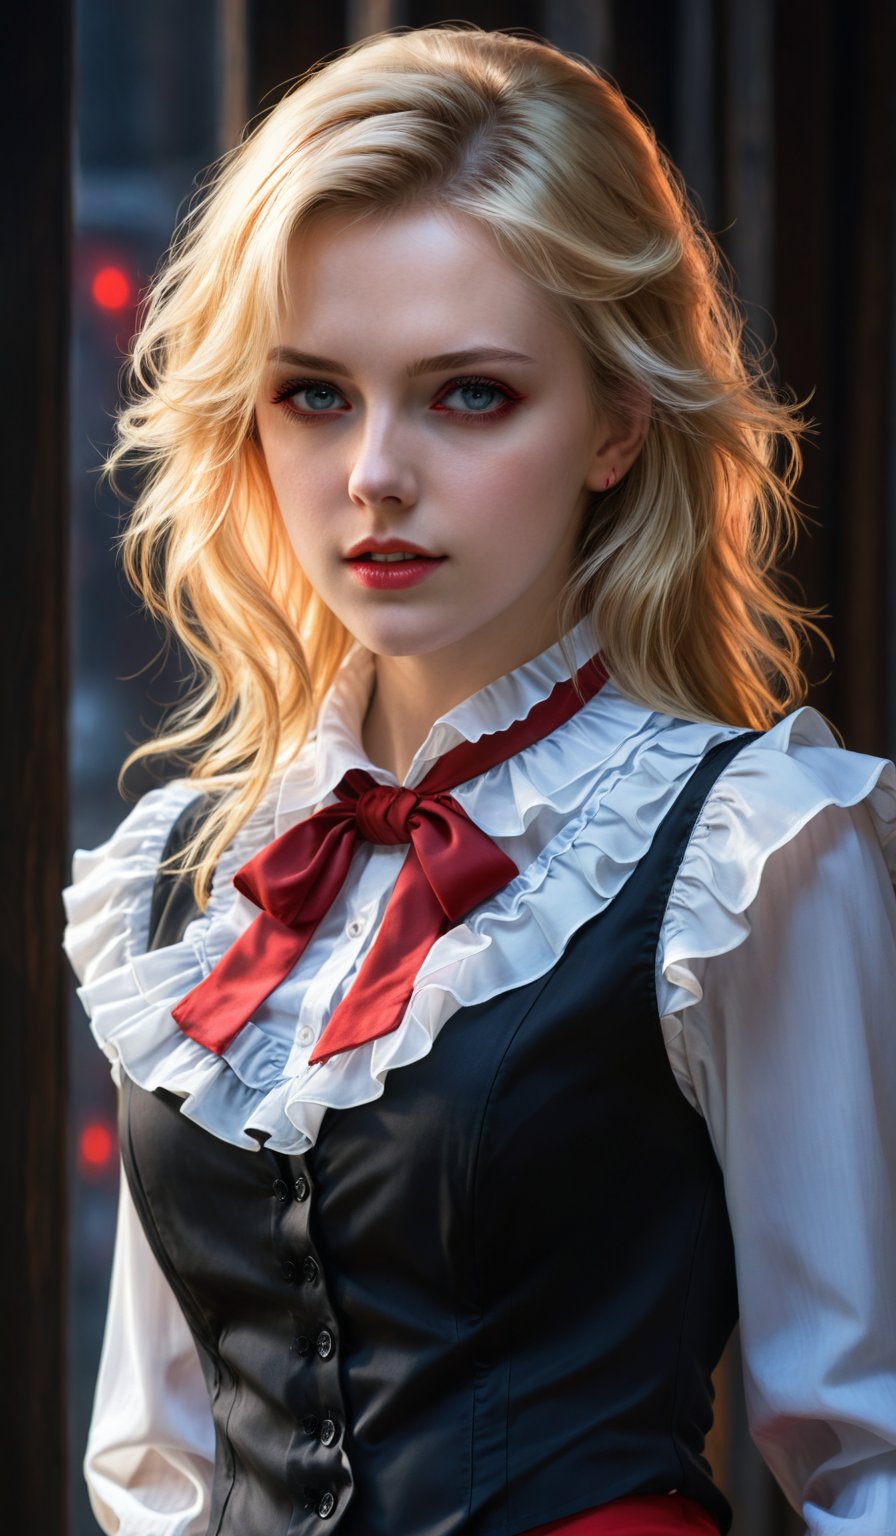 score_9, score_8_up, score_7_up, score_6_up, masterpiece,best quality,illustration,style of Realistic portrait of ExRumia,Frilled Blouse,Blonde hair,red Eyes,Black Vest,Red Collar,long exposure,HDR, Contrast,